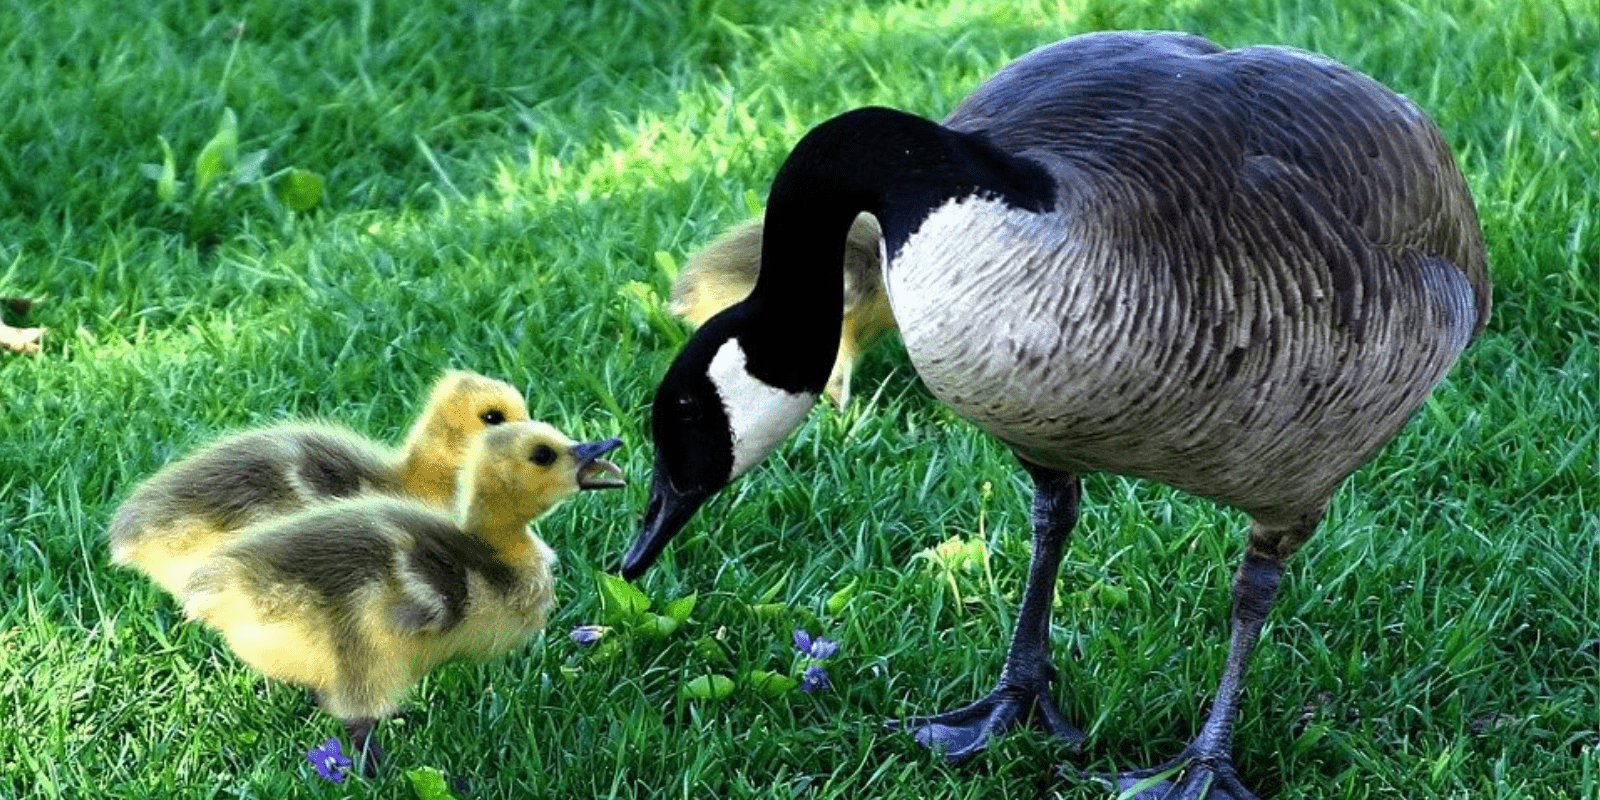 A Canada goose with offspring